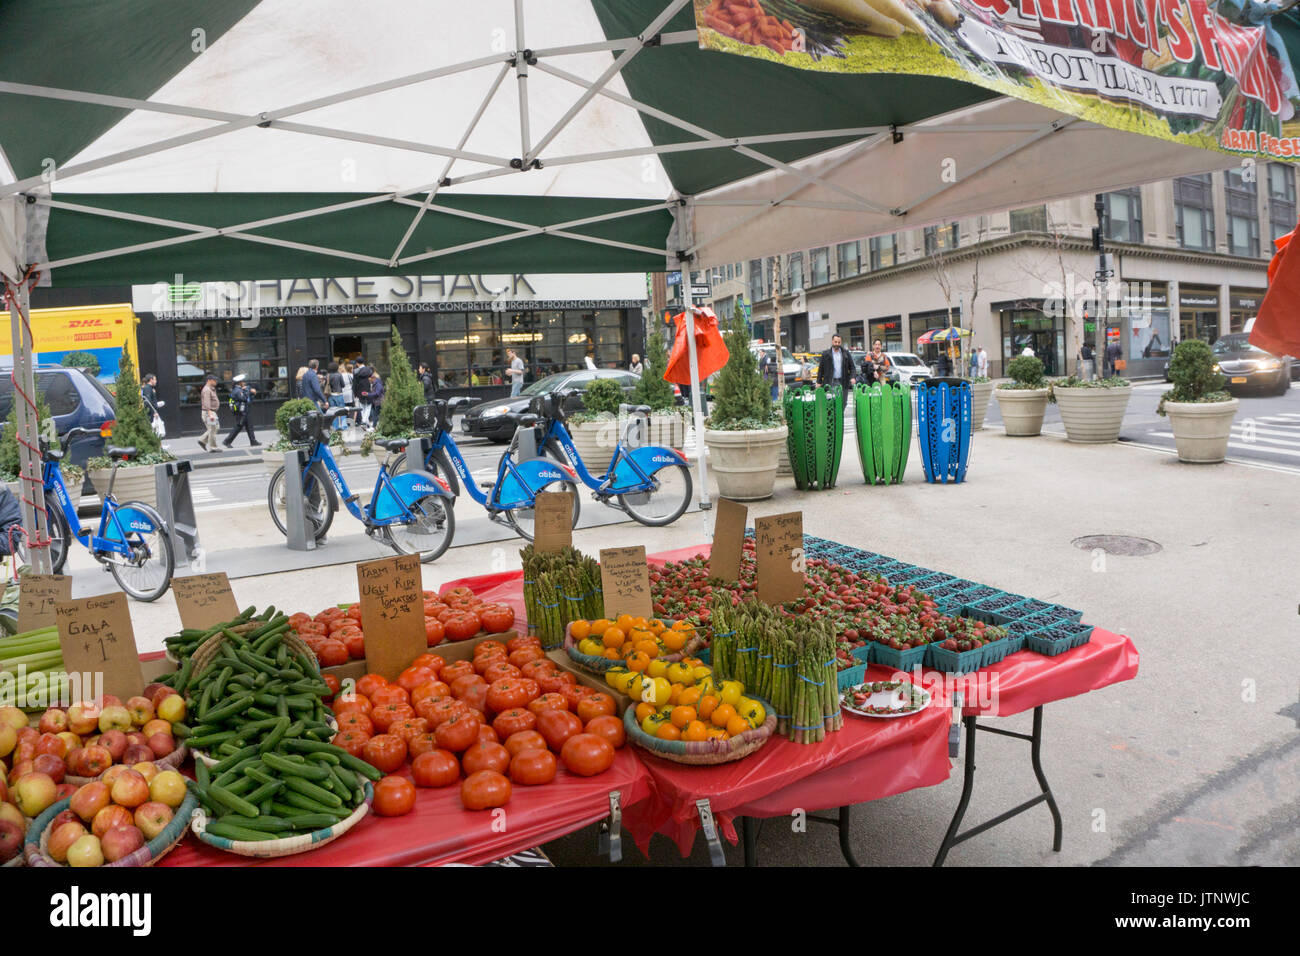 farmers market with luscious spring produce shares partly closed section Broadway between 36th & 35th street with Citibike station & 3 recycling cans Stock Photo